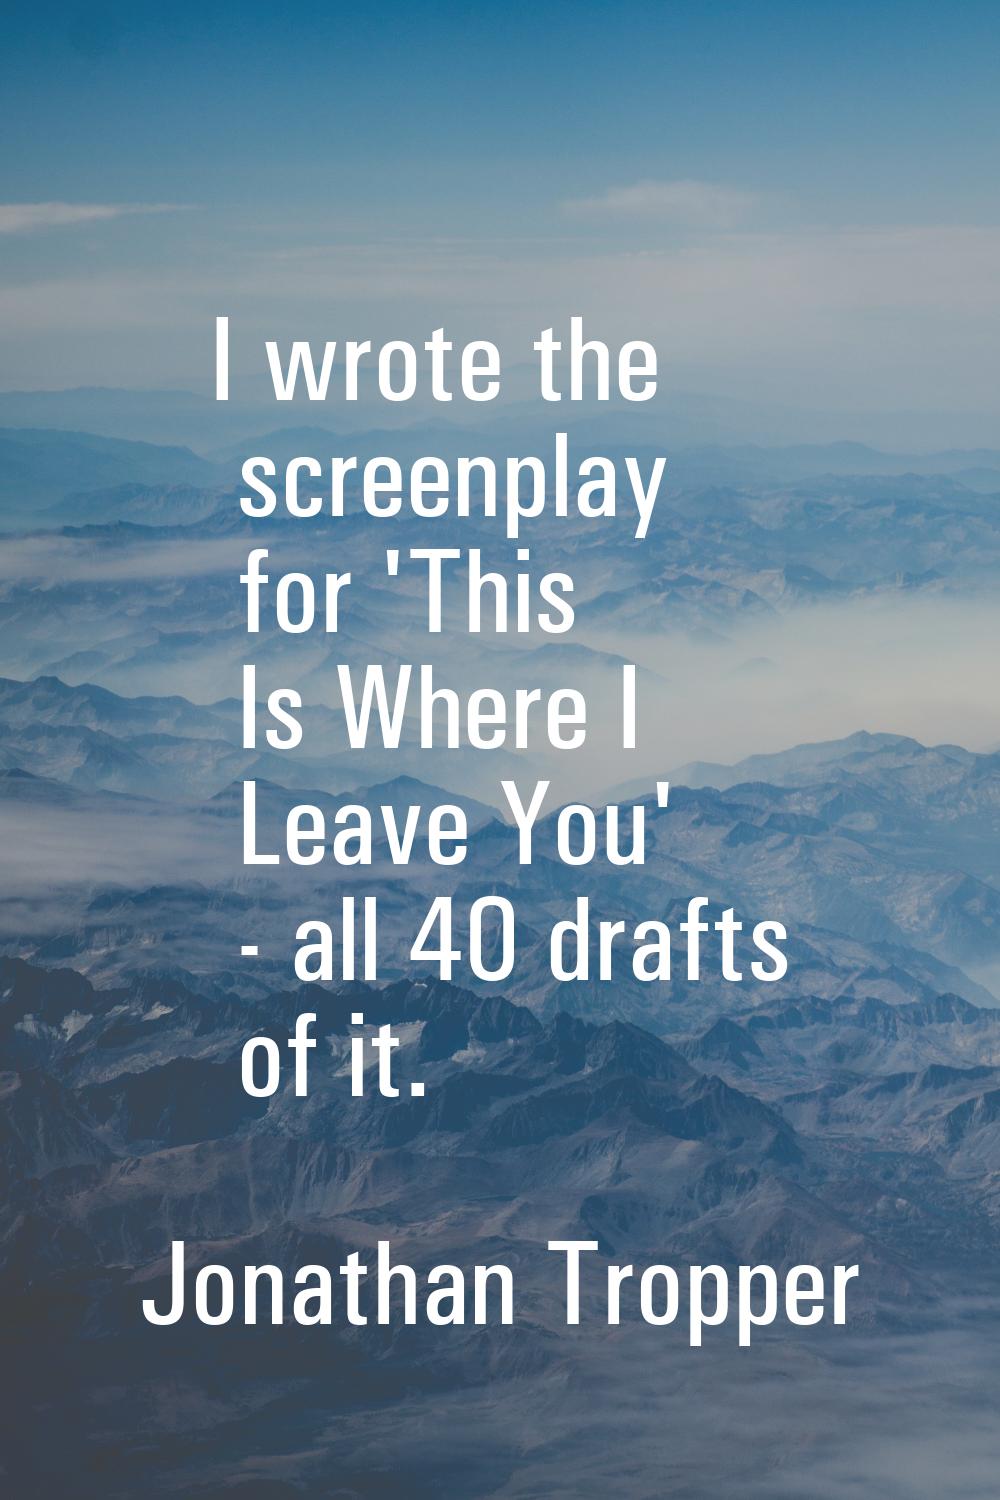 I wrote the screenplay for 'This Is Where I Leave You' - all 40 drafts of it.